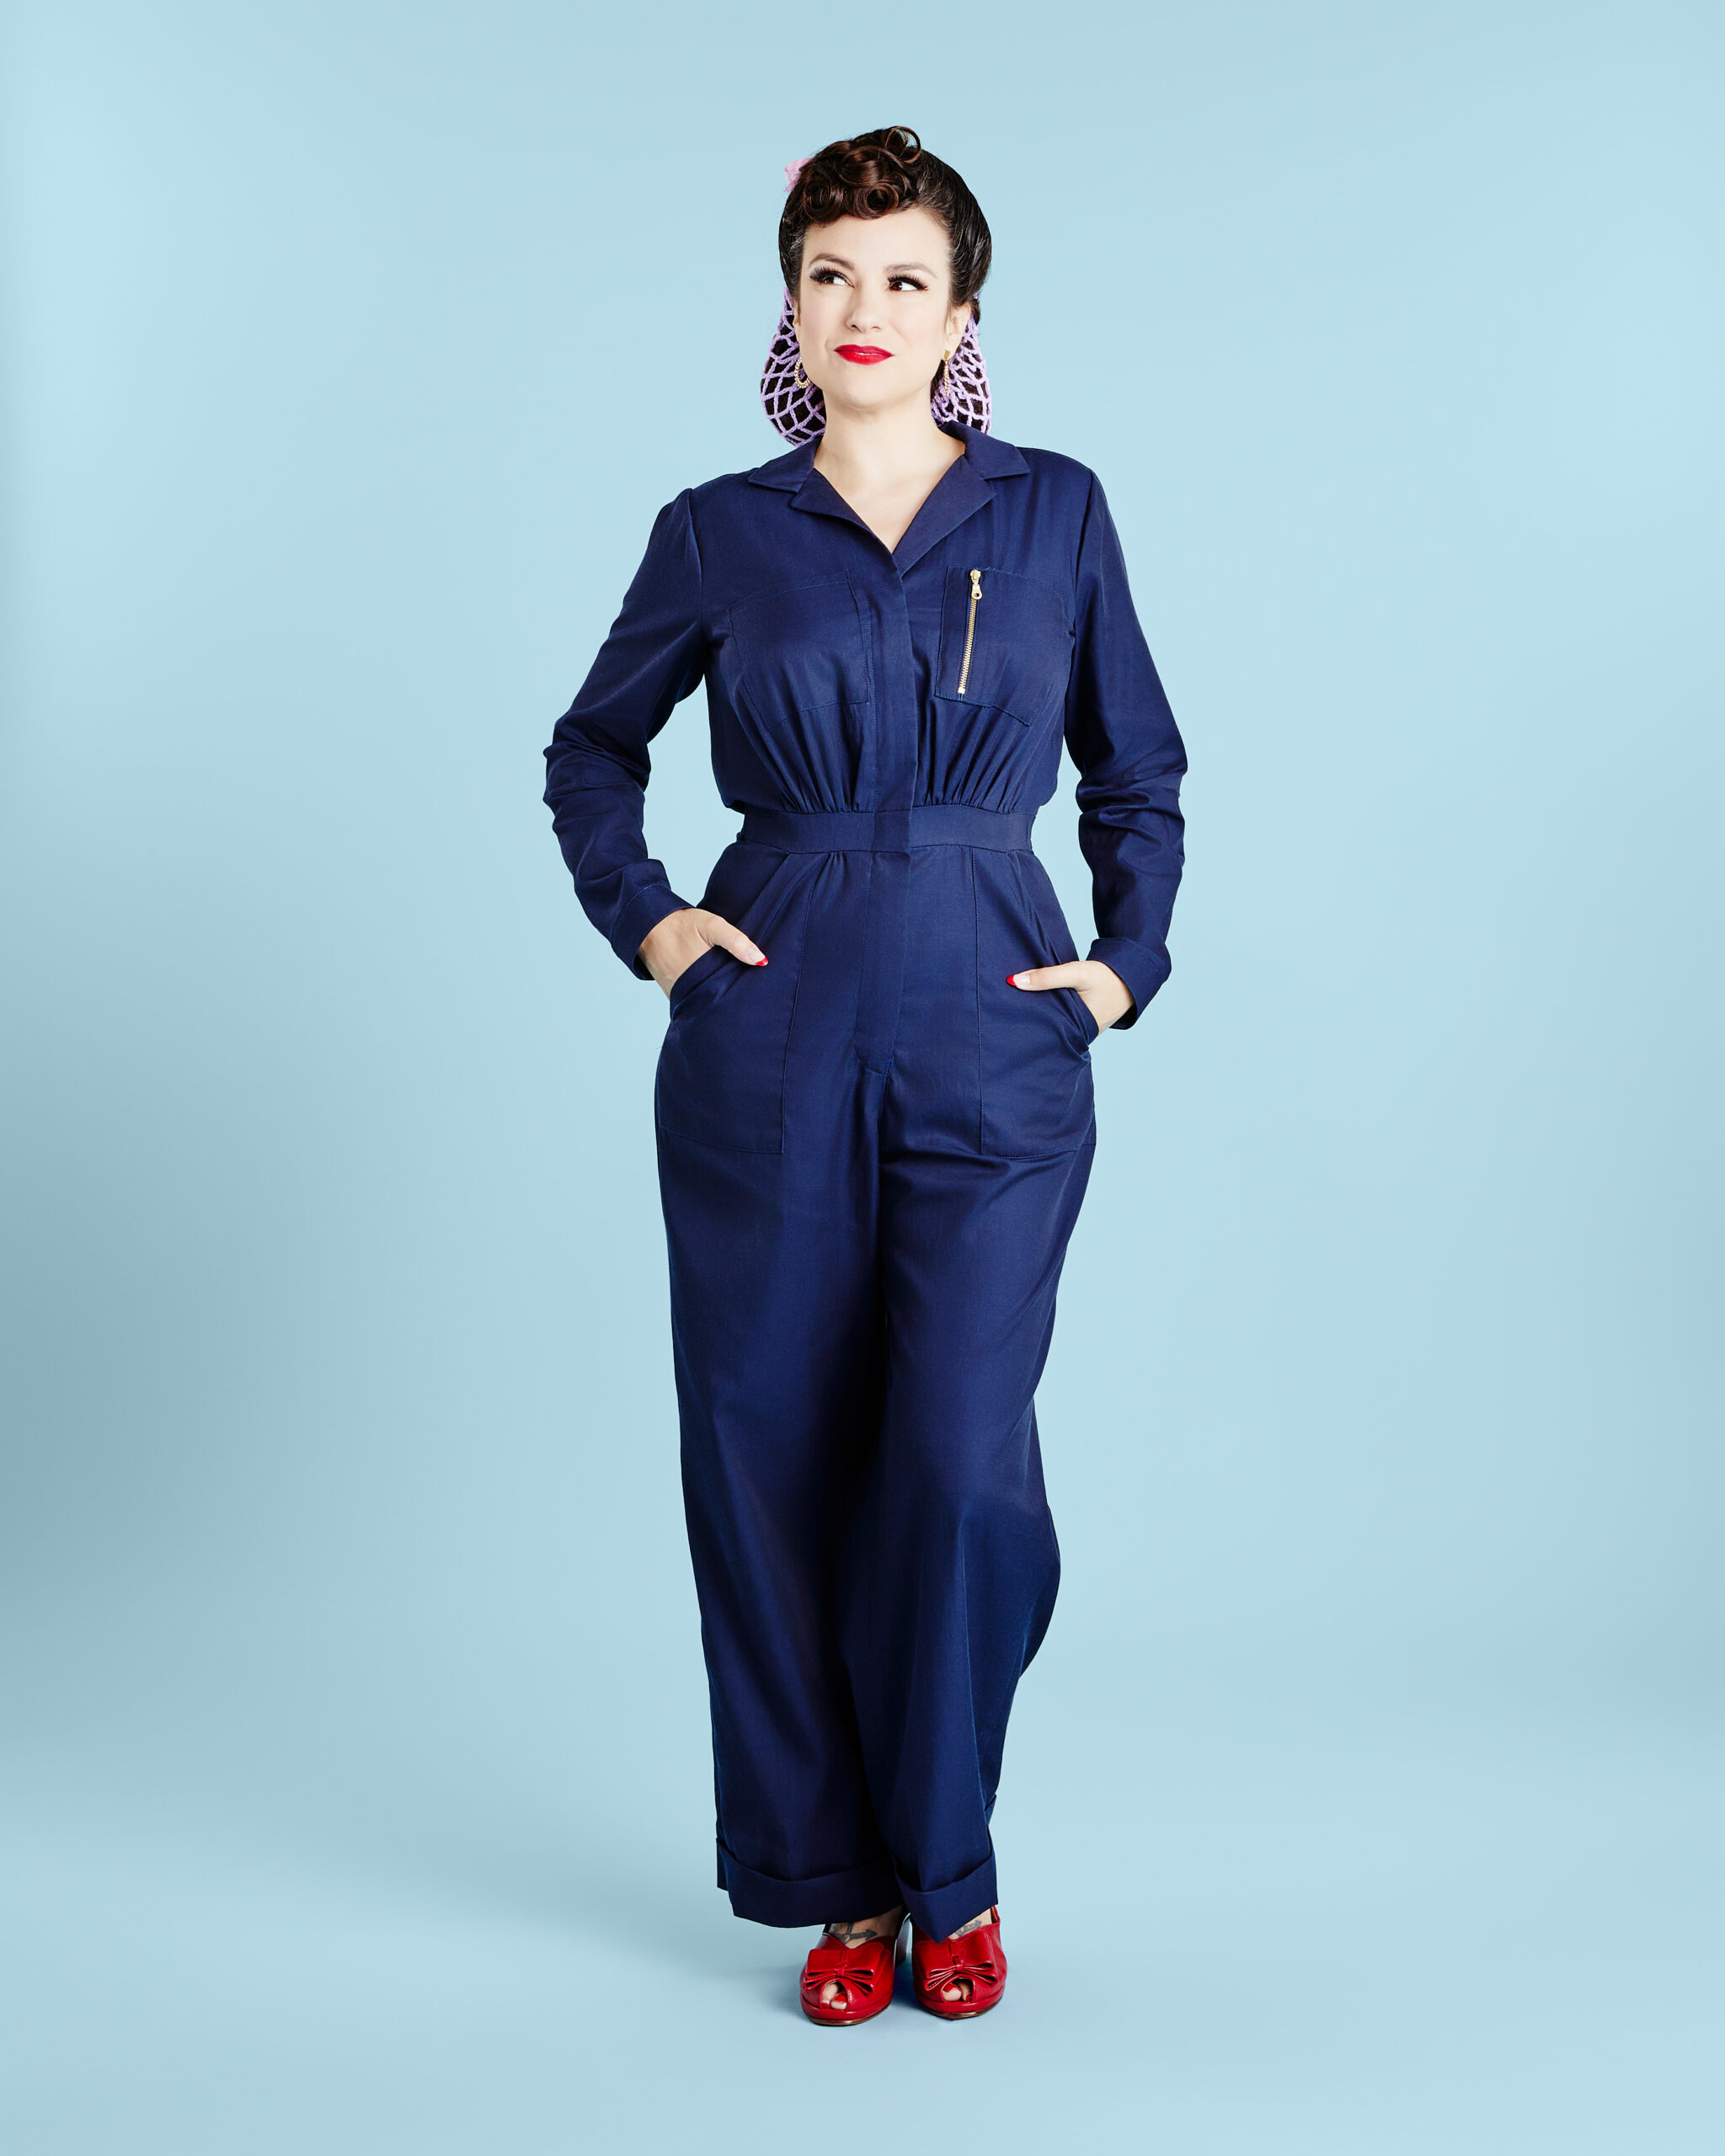 42 Jumpsuit sewing patterns ideas  sewing patterns, jumpsuit pattern sewing,  jumpsuit